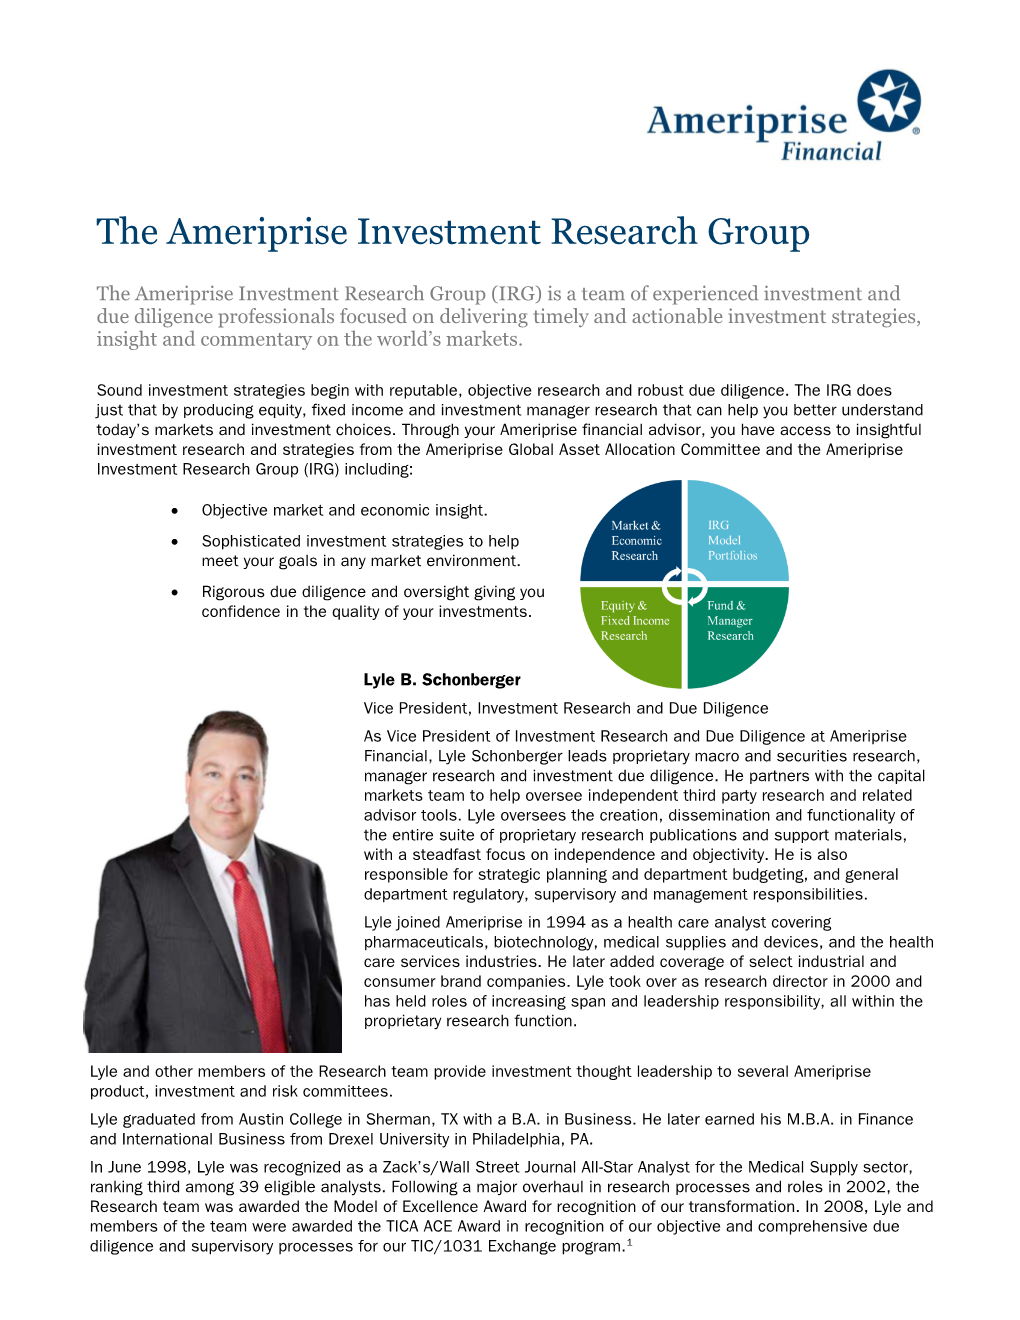 The Ameriprise Investment Research Group